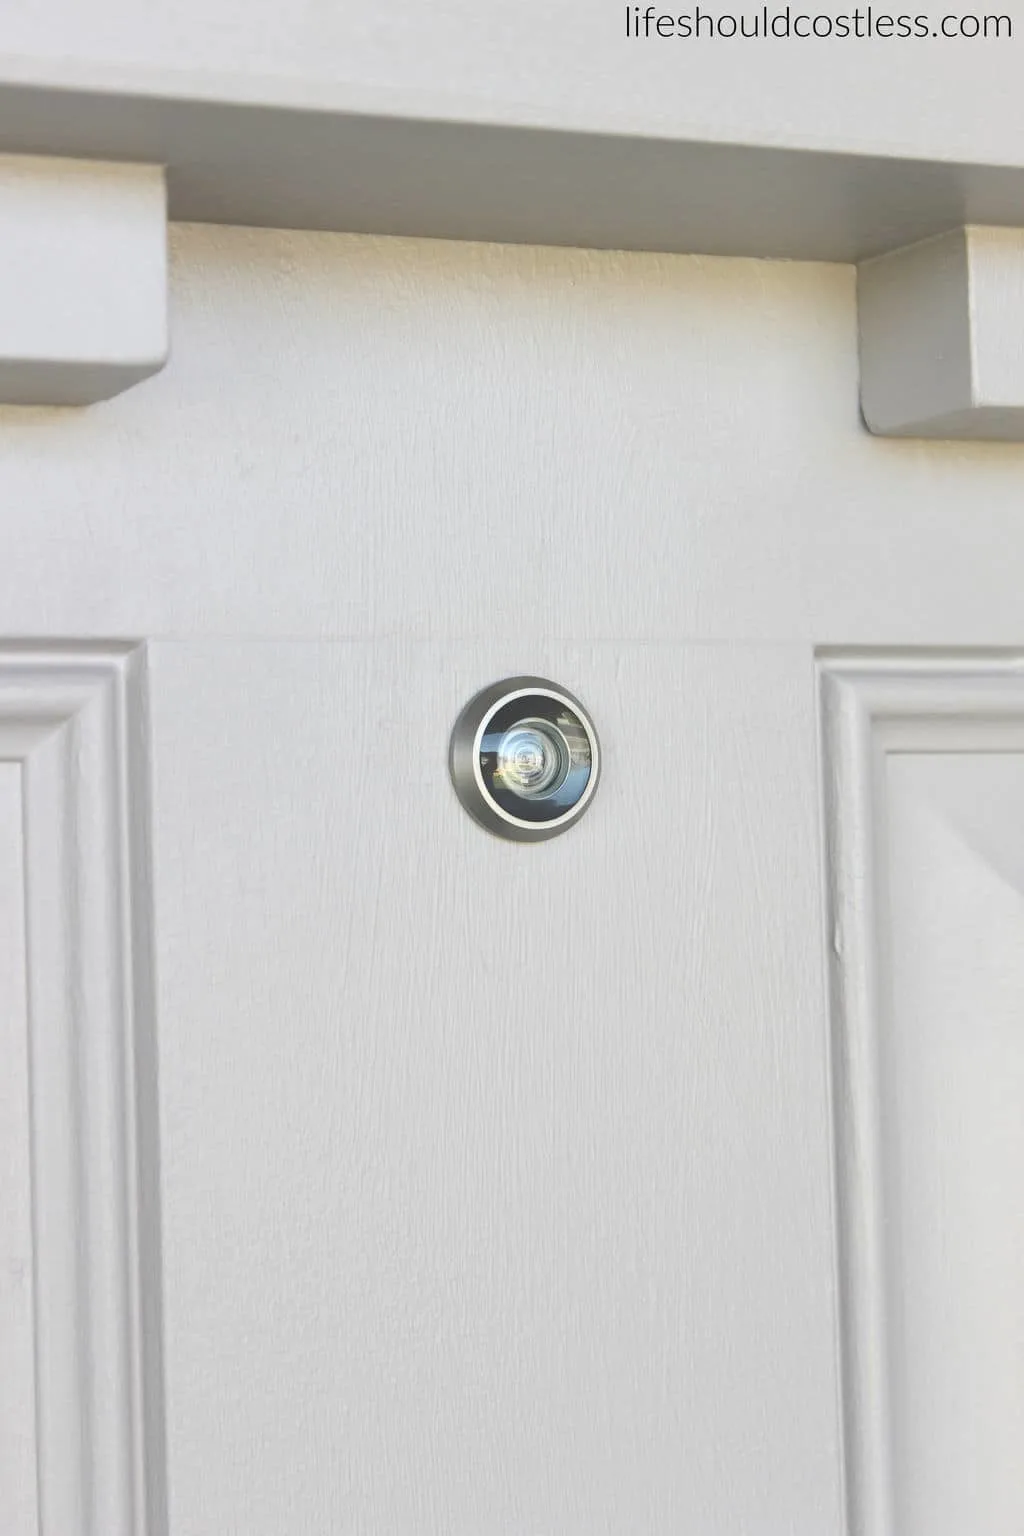 DIY How to install a peep hole in your front door. After 2.